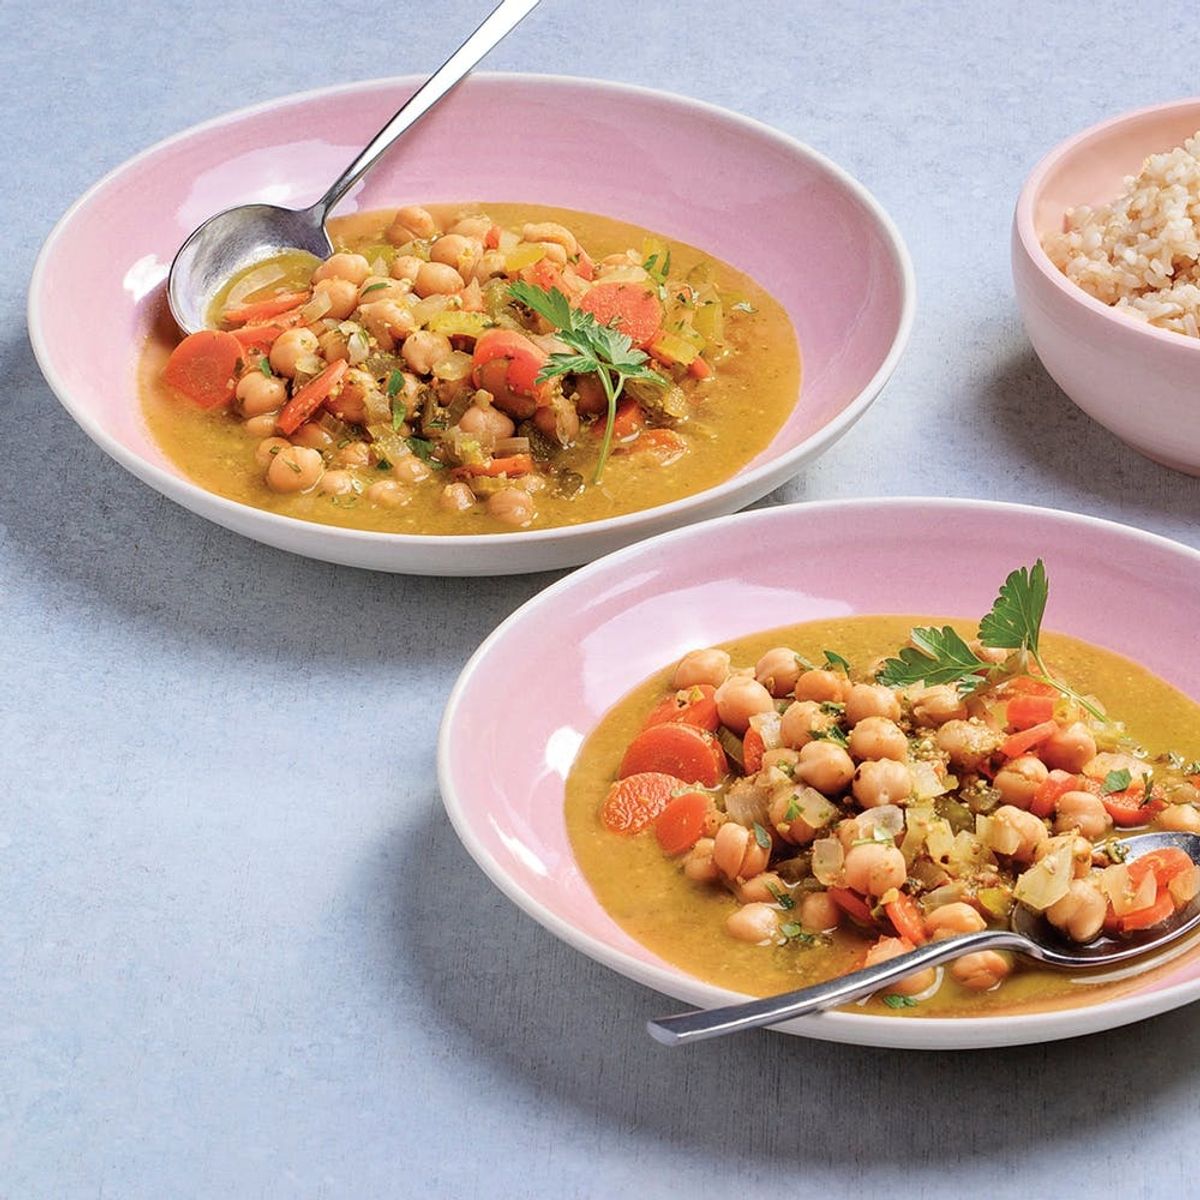 Kimberly Snyder’s Chickpea Stew With Pesto Helps You Get Your Veg When It’s Way Too Cold